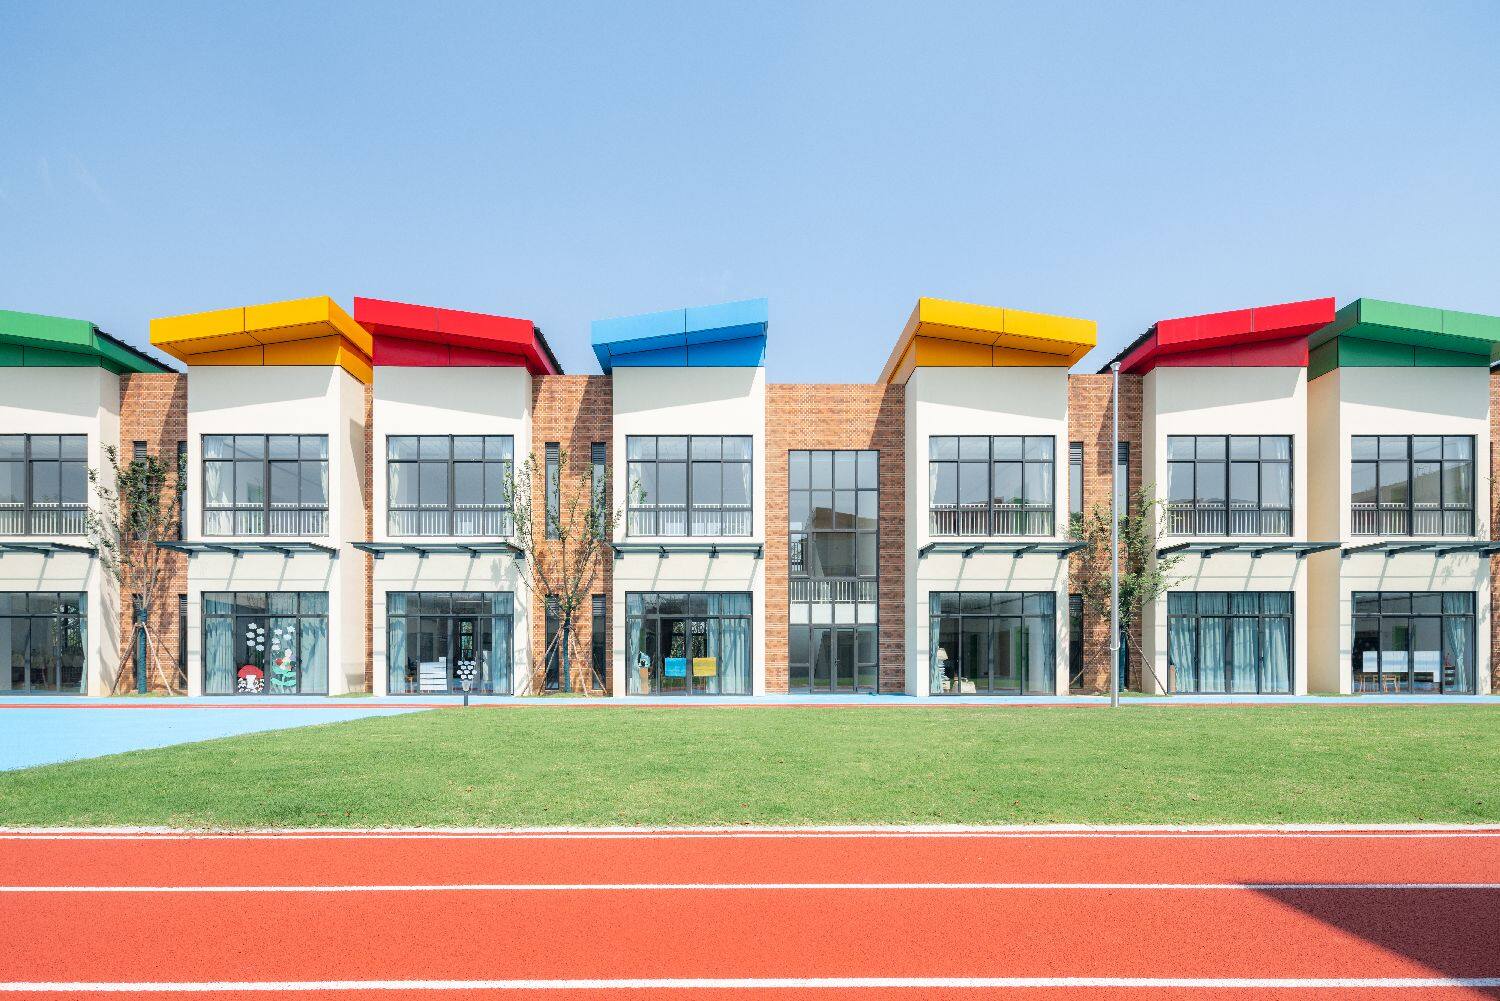 Building of a private school in China